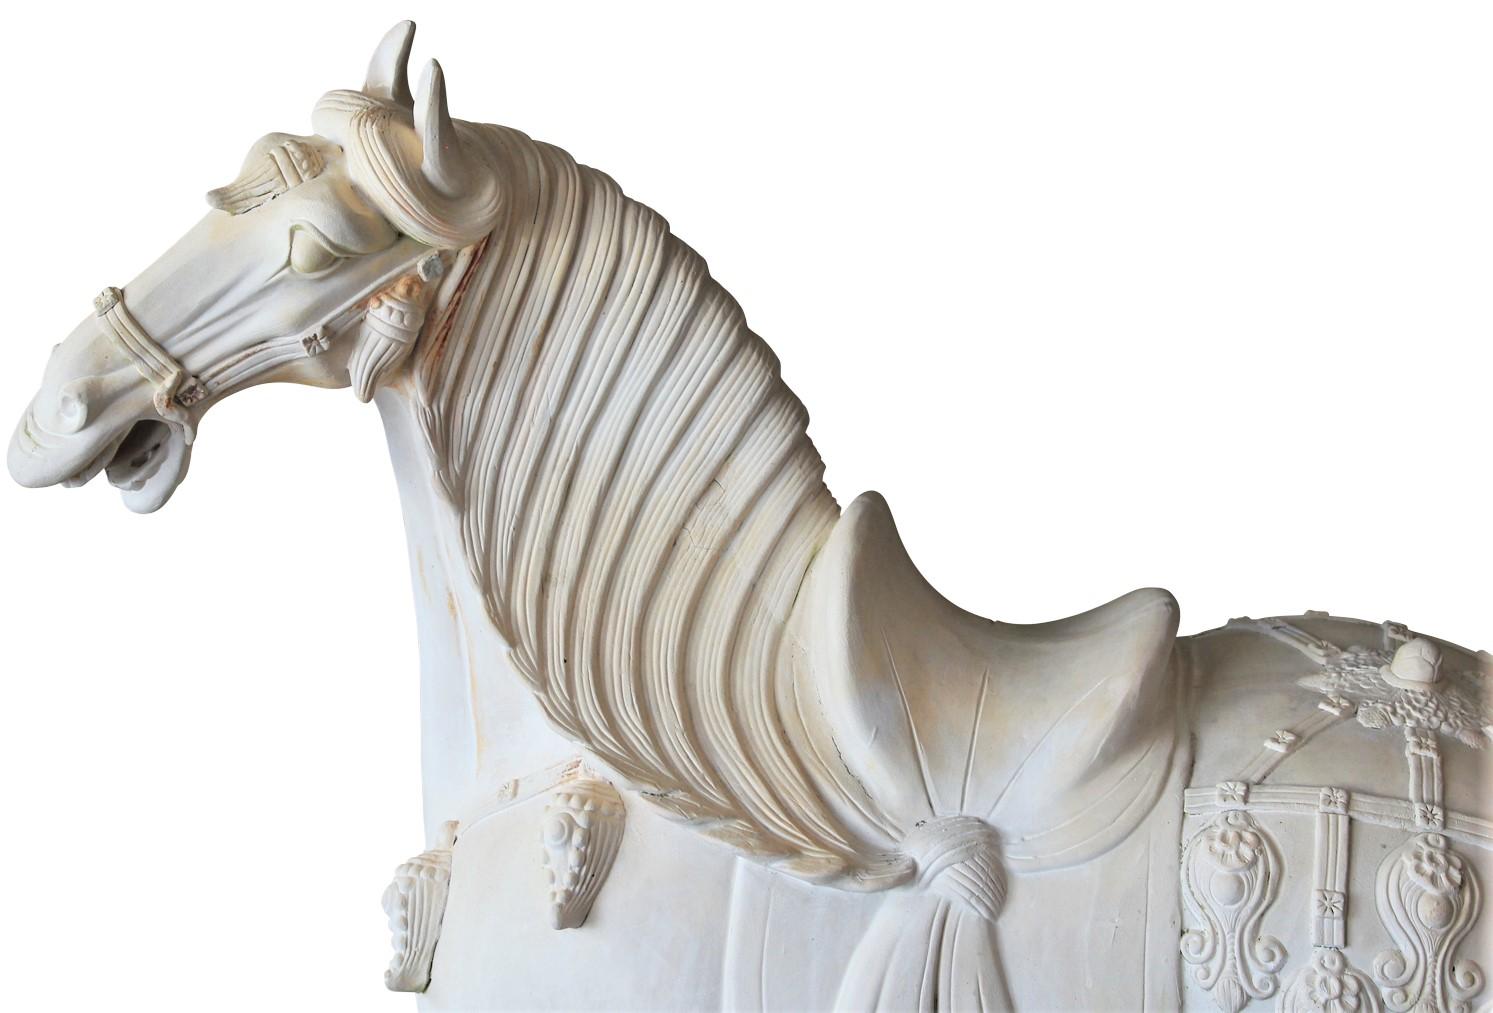 Early ceramic reproduction of a Tang Dynasty horse sculpture. During the Tang Dynasty, horses were a precious import and therefore became an emblem of wealth and power. Because of this, they were a common motif in tomb figures. This piece features a